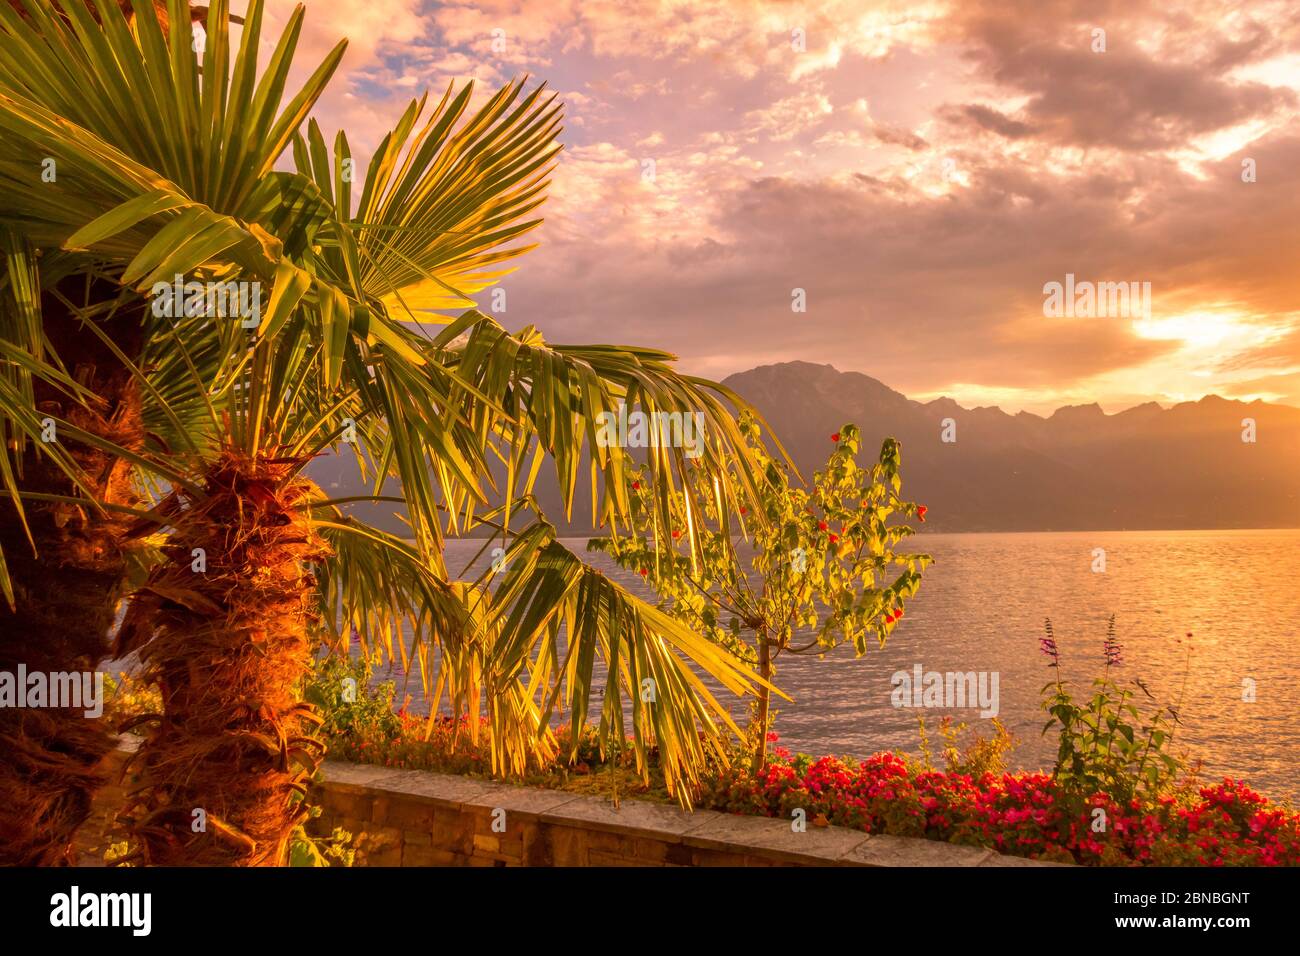 Panoramic sunset view of Lake Geneva, Switzerland with palm tree and flowers from Montreux promenade Stock Photo